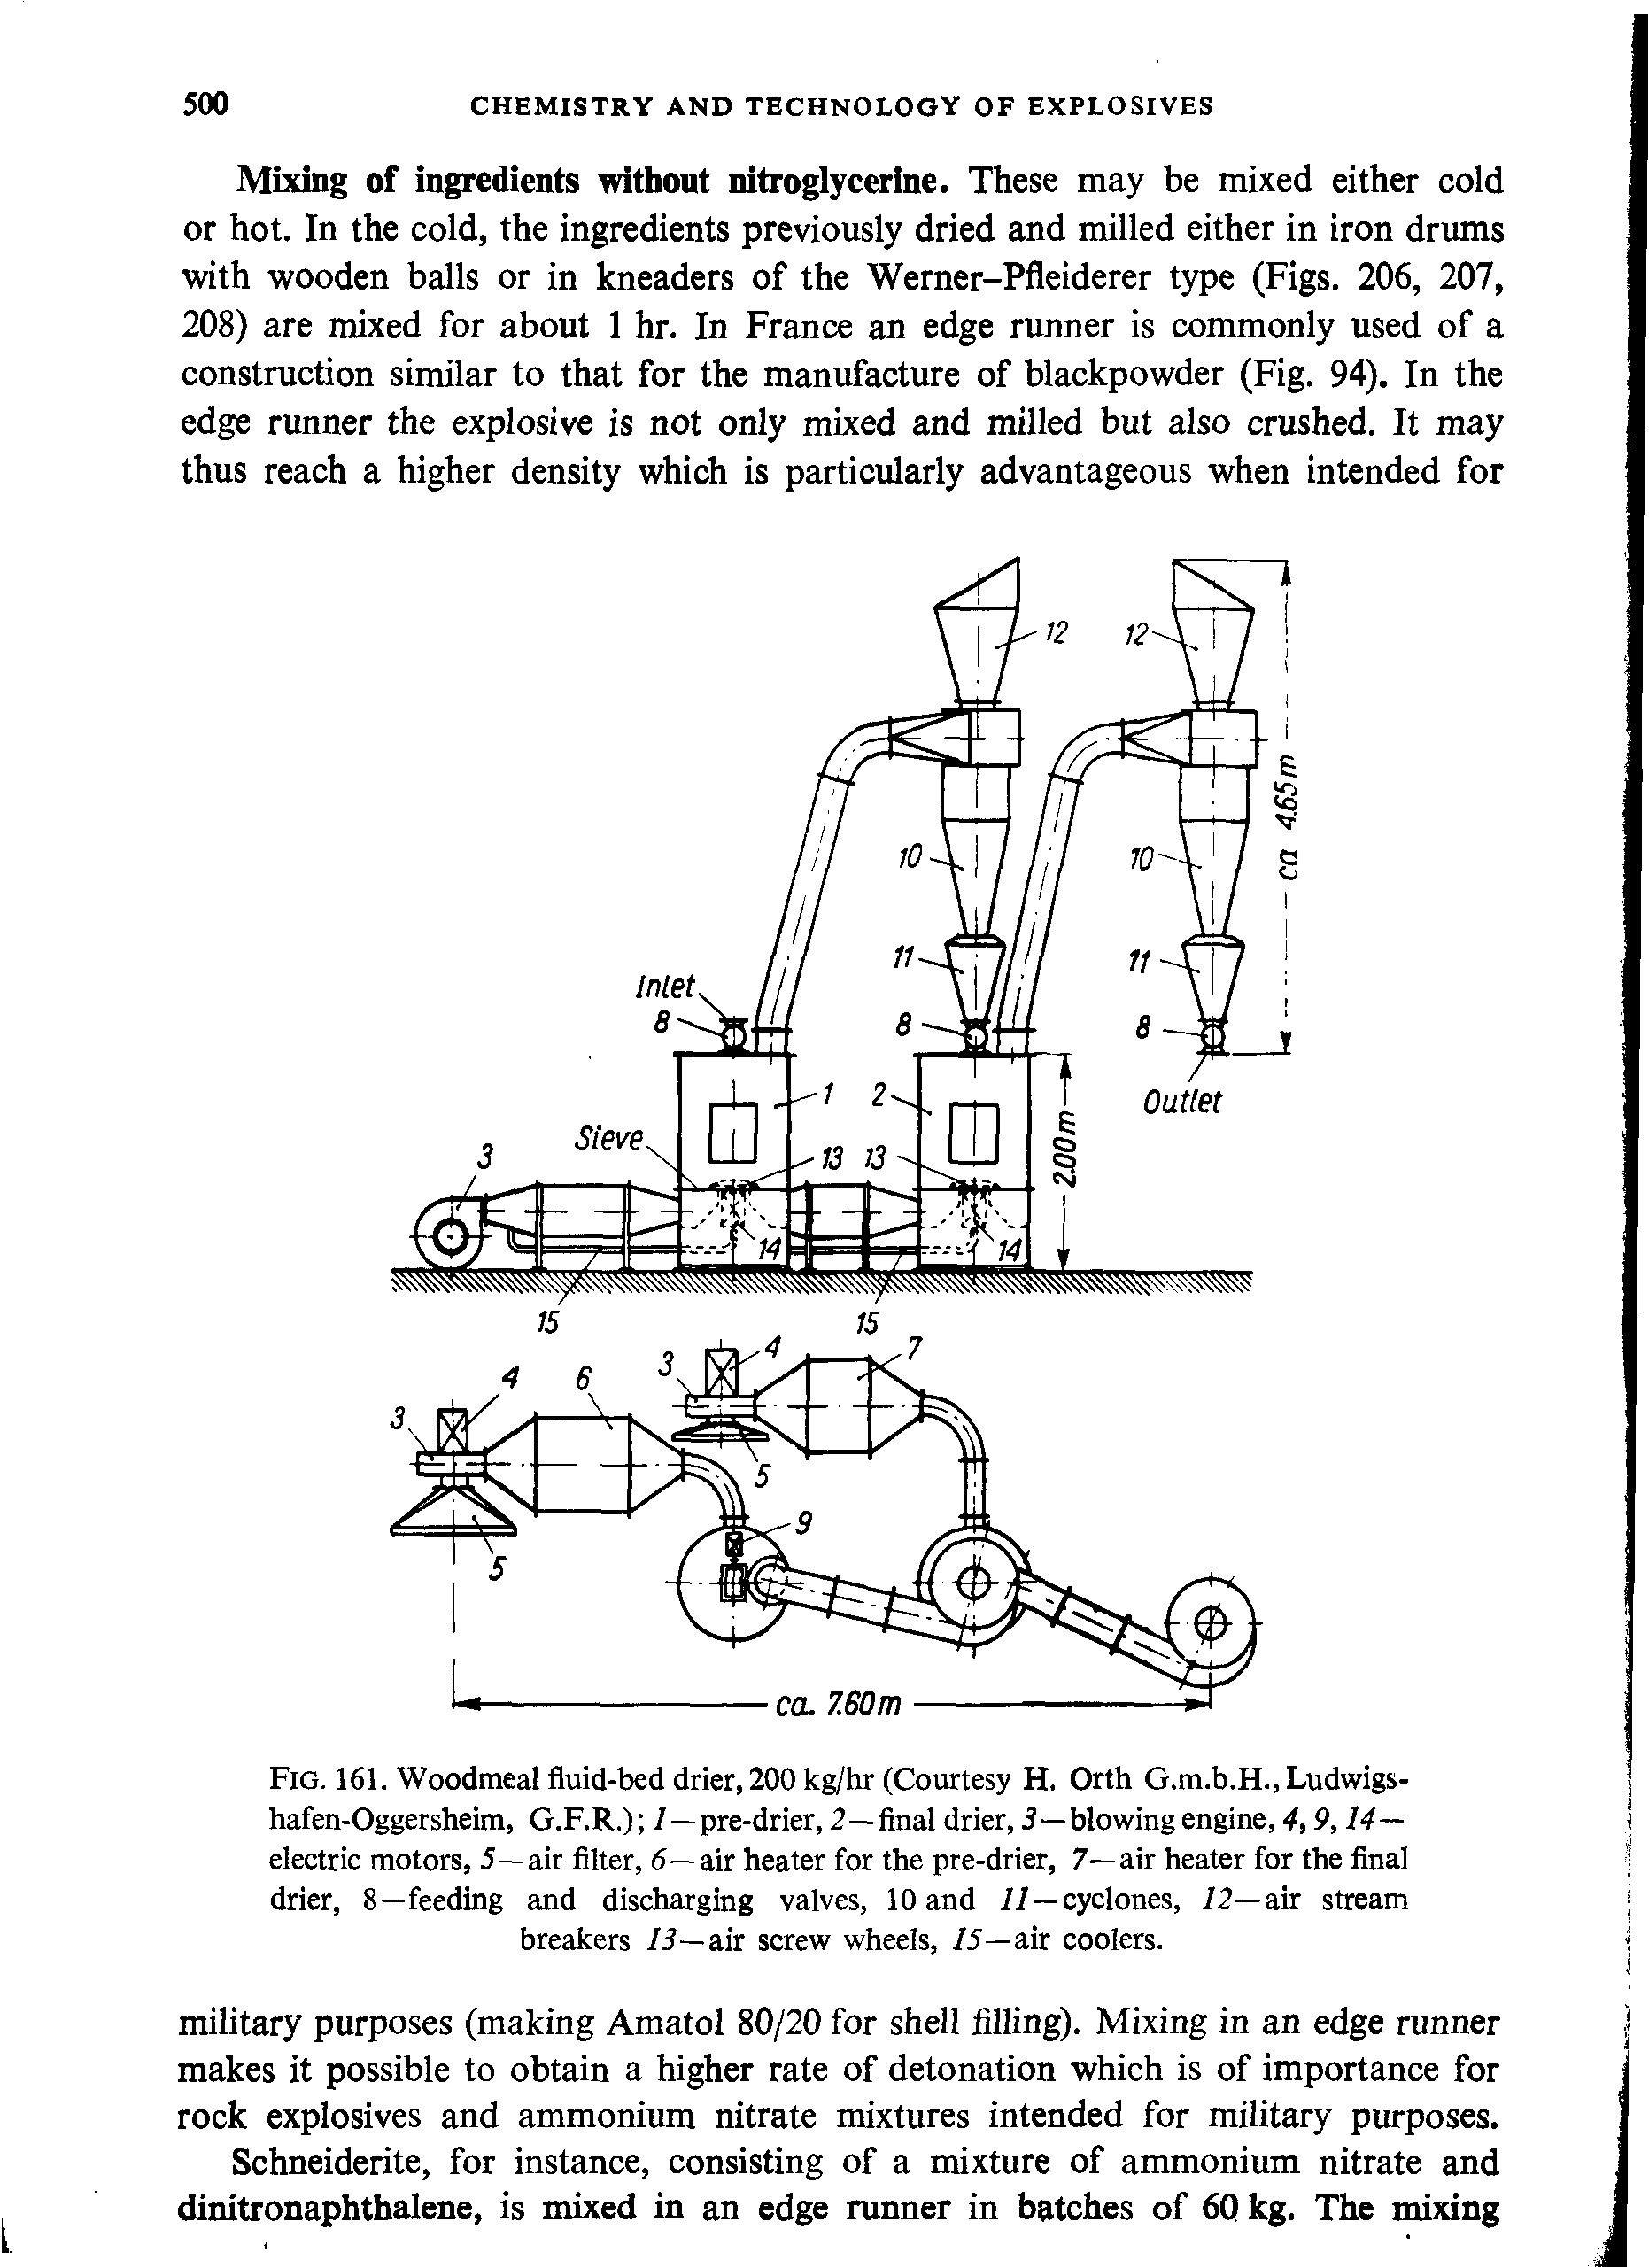 Fig. 161. Woodmeal fluid-bed drier, 200 kg/hr (Courtesy H. Orth G.m.b.H., Ludwigs-hafen-Oggersheim, G.F.R.) /-pre-drier, 2—final drier, 2—bio wing engine, 4,9,14— electric motors, 5—air filter, 6— air heater for the pre-drier, 7—air heater for the final drier, 8—feeding and discharging valves, 10 and //—cyclones, 12—air stream breakers 13—air screw wheels, 15—air coolers.